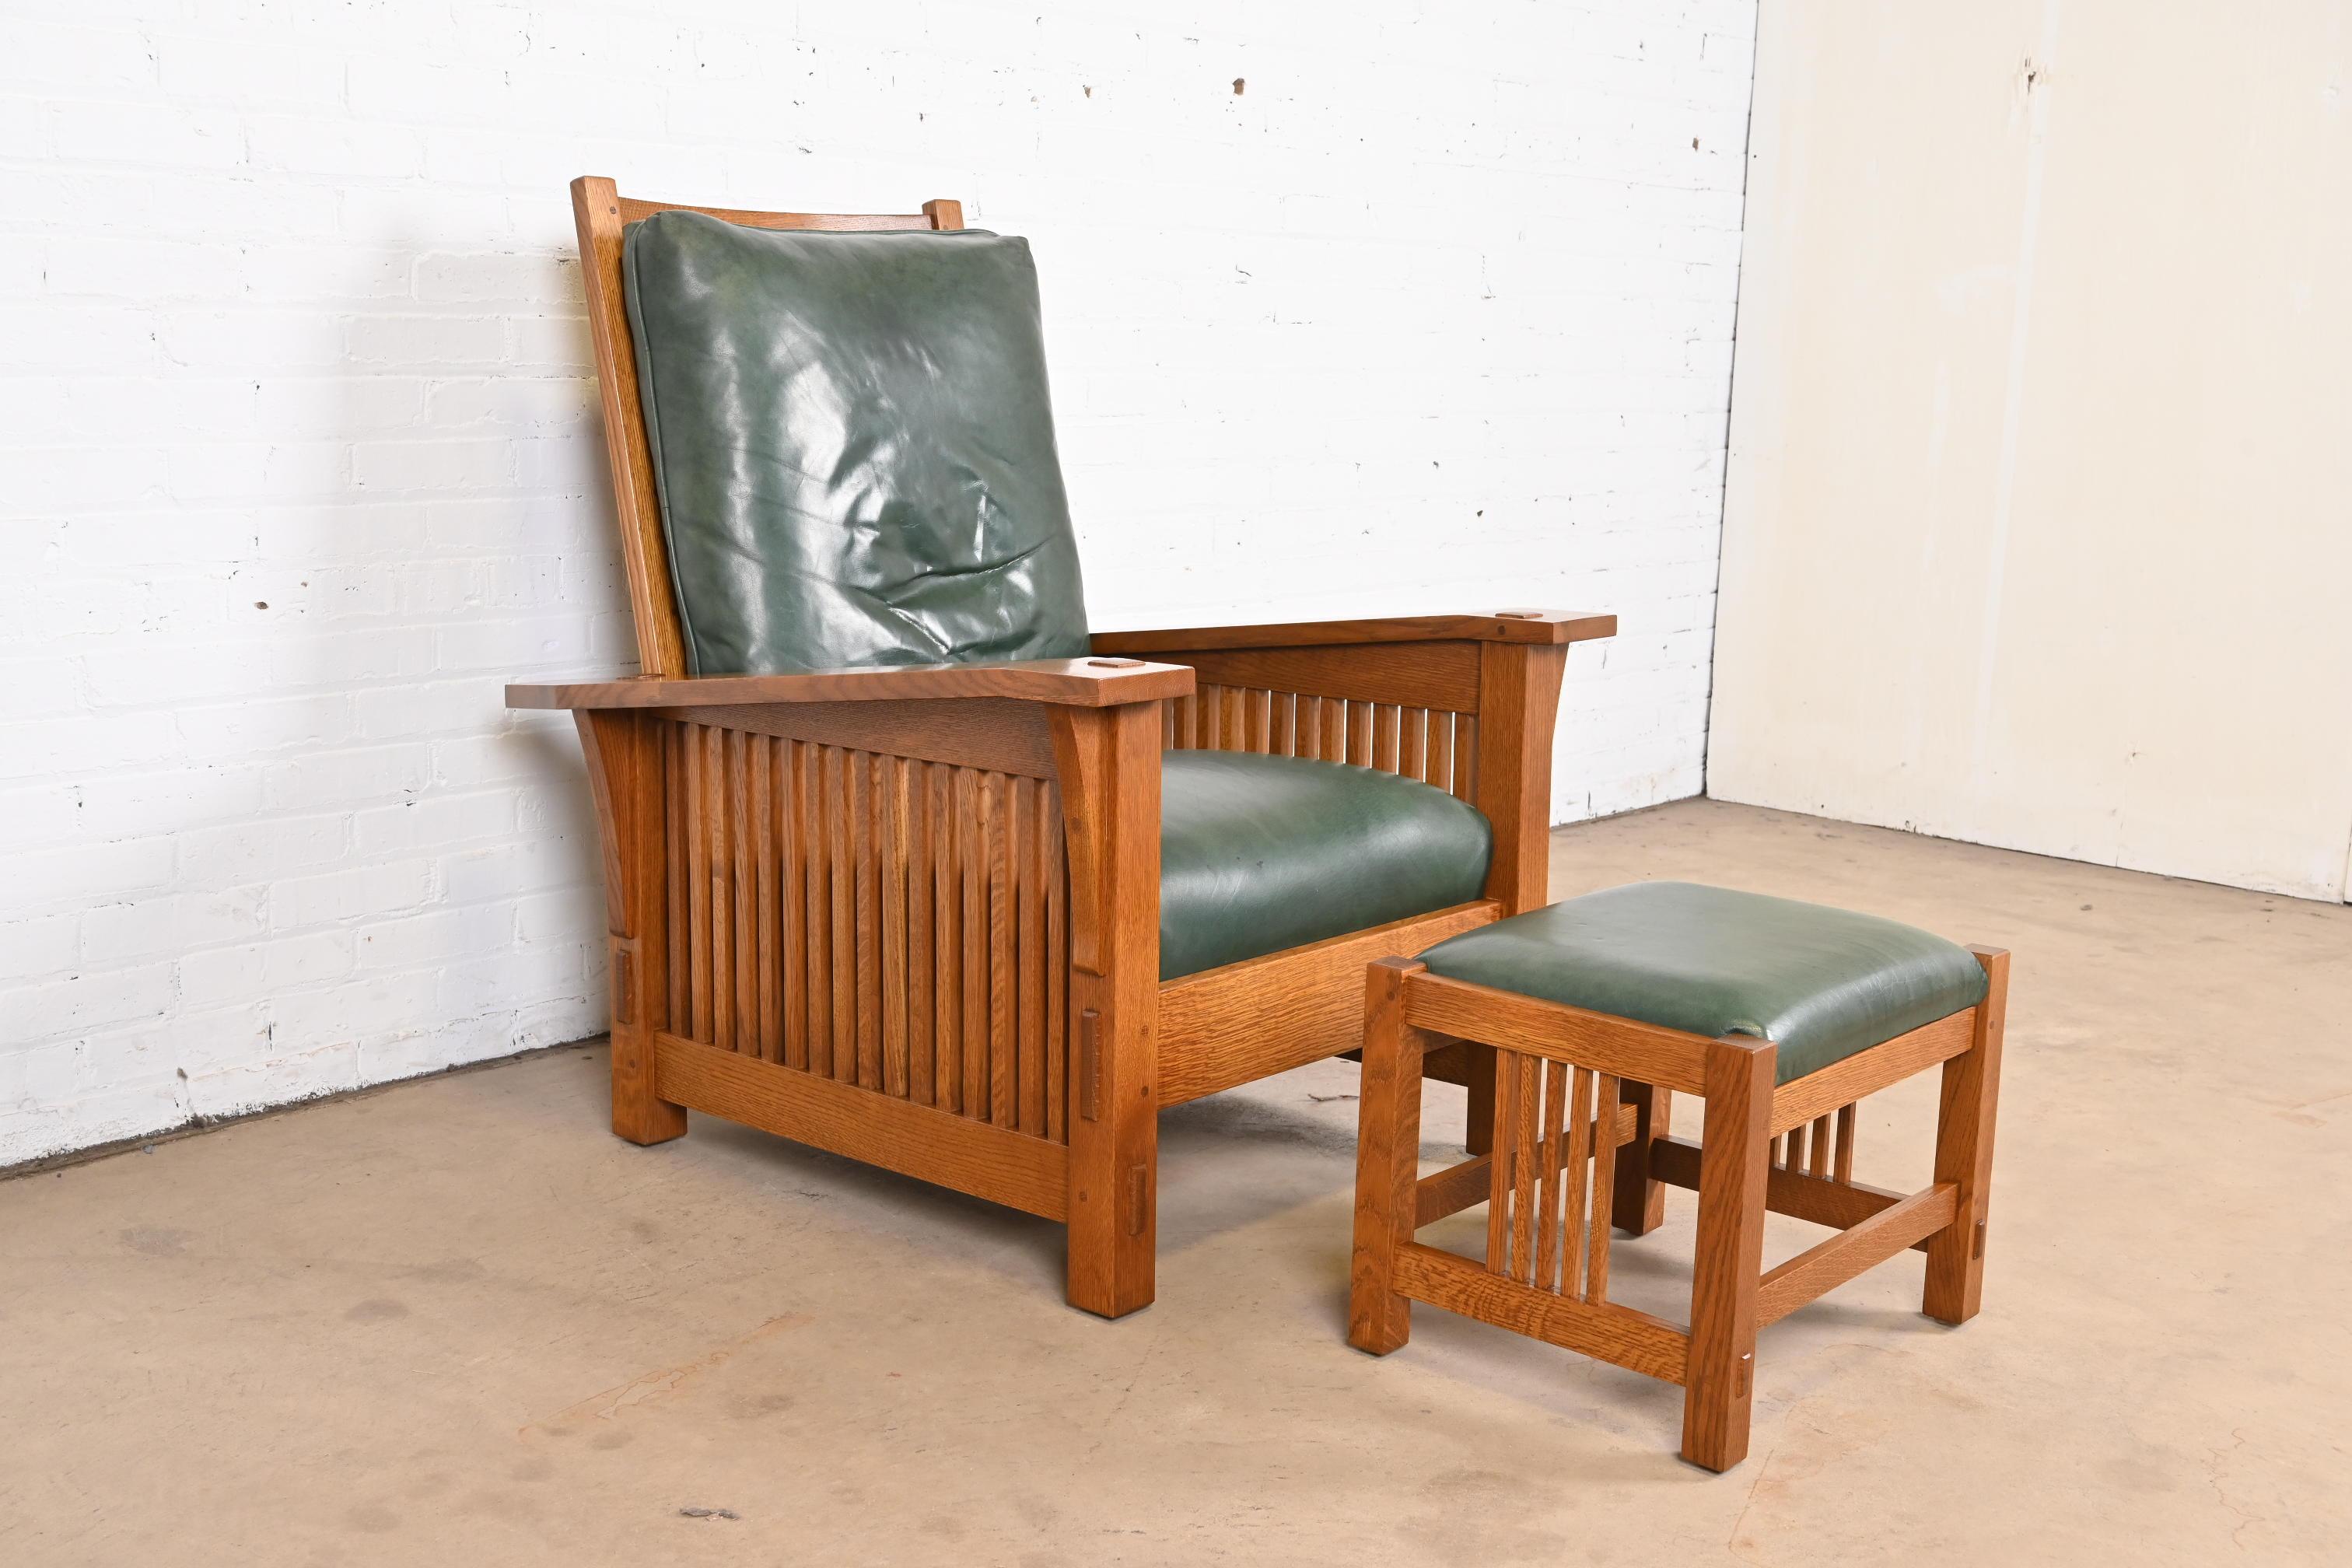 An exceptional Mission or Arts & Crafts style spindle Morris reclining lounge chair with ottoman

By Stickley

USA, Late 20th Century

Solid quarter sawn oak, with green leather upholstered seat and back cushions.

Measures:
Chair - 32.75